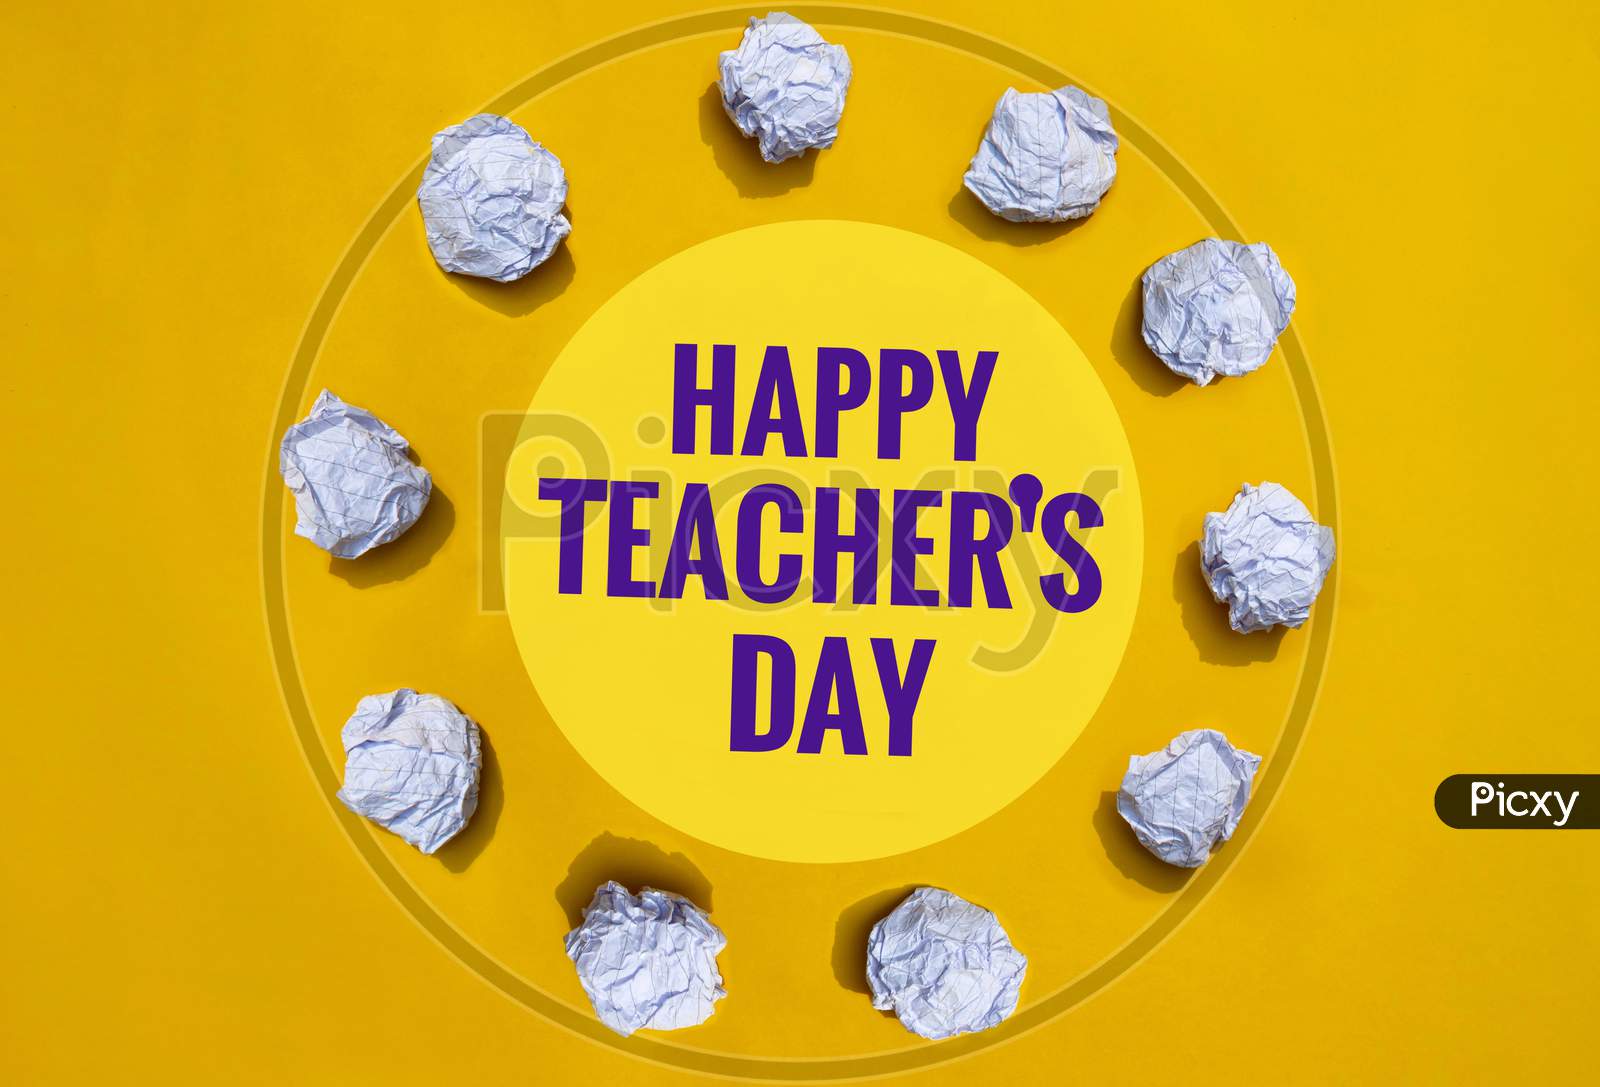 Happy Teacher's Day Creative Photo Crumpled Paper Balls, Perfect For Wallpaper